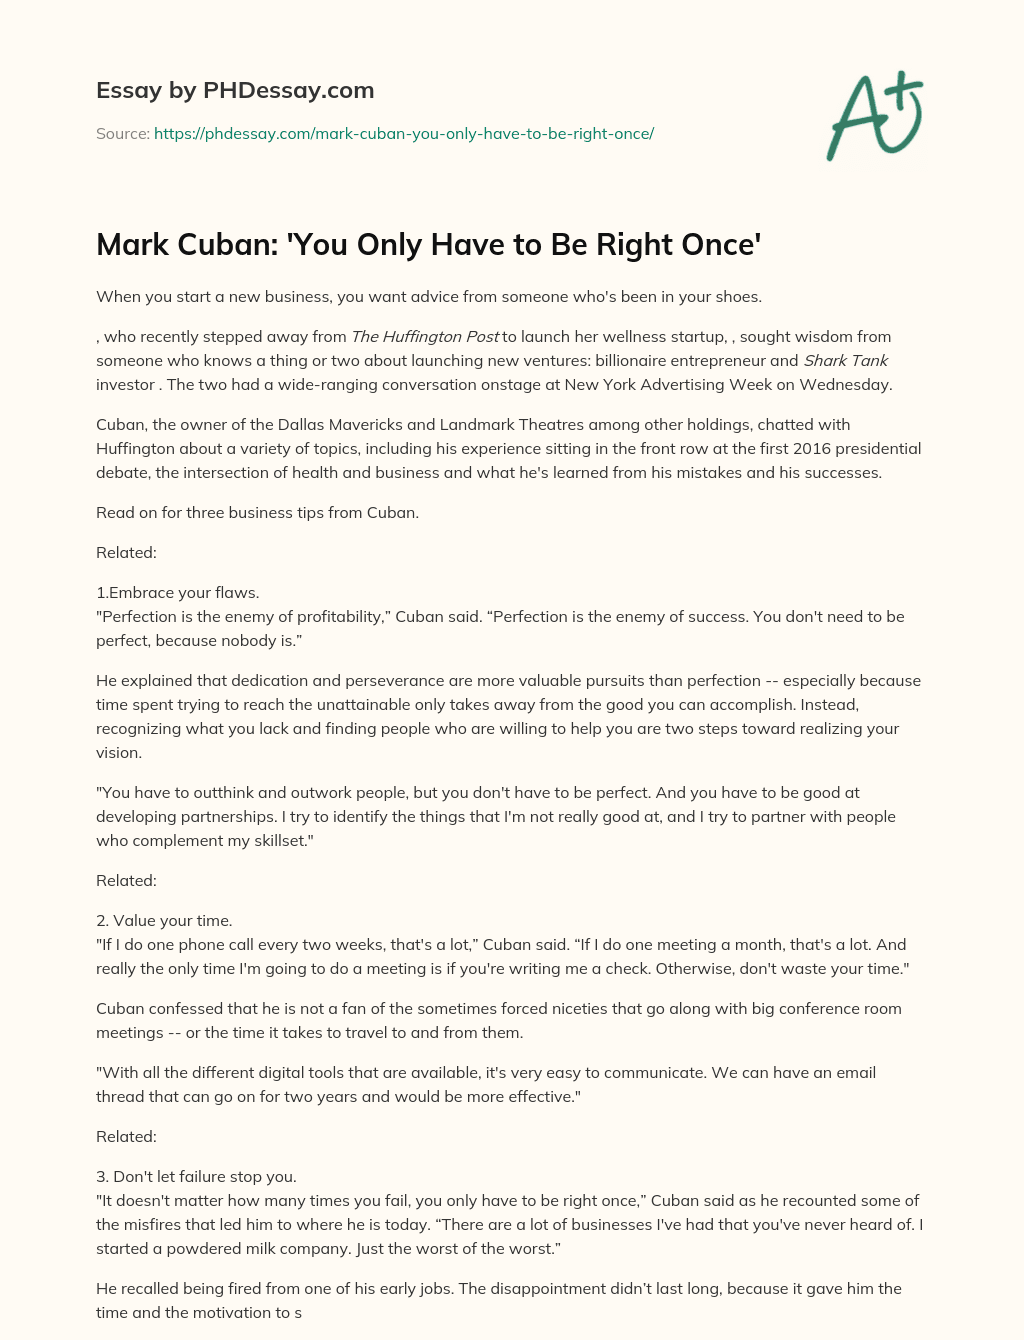 Mark Cuban: ‘You Only Have to Be Right Once’ essay